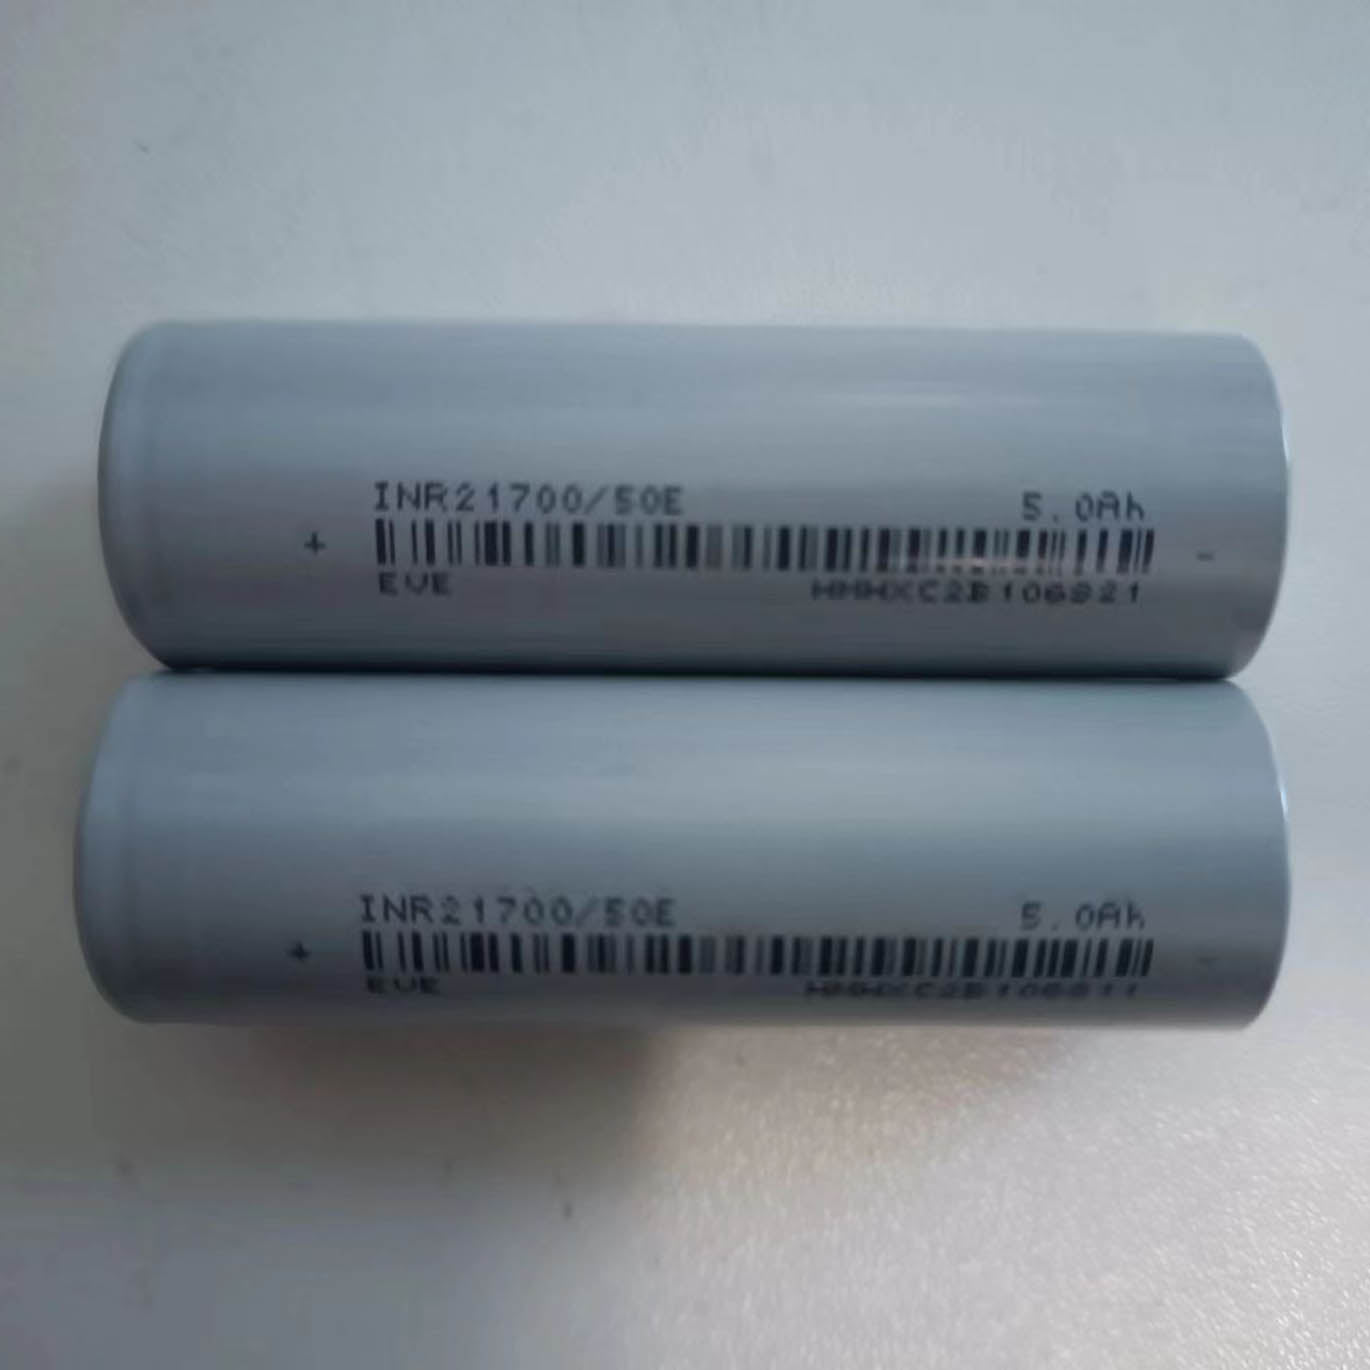 Unprotected Rechargeable Lithium Battery 18650/21700/14500